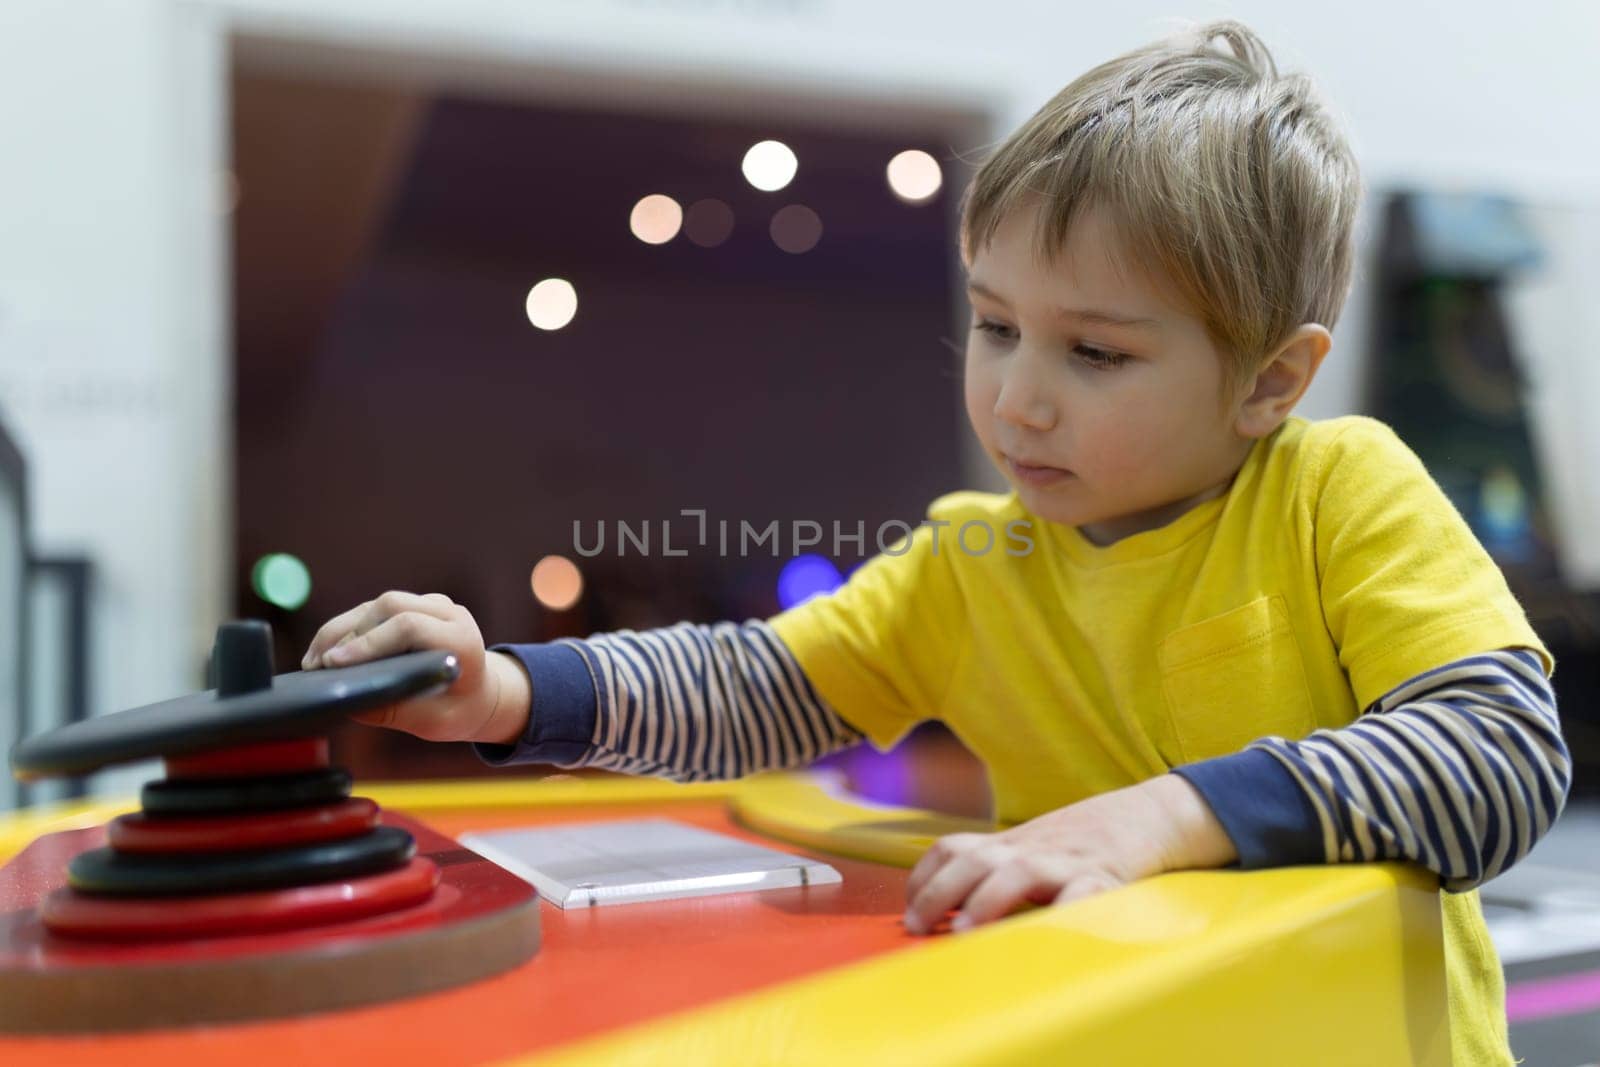 A young boy is playing a video game with a red button. The boy is wearing a yellow shirt and has a serious expression on his face